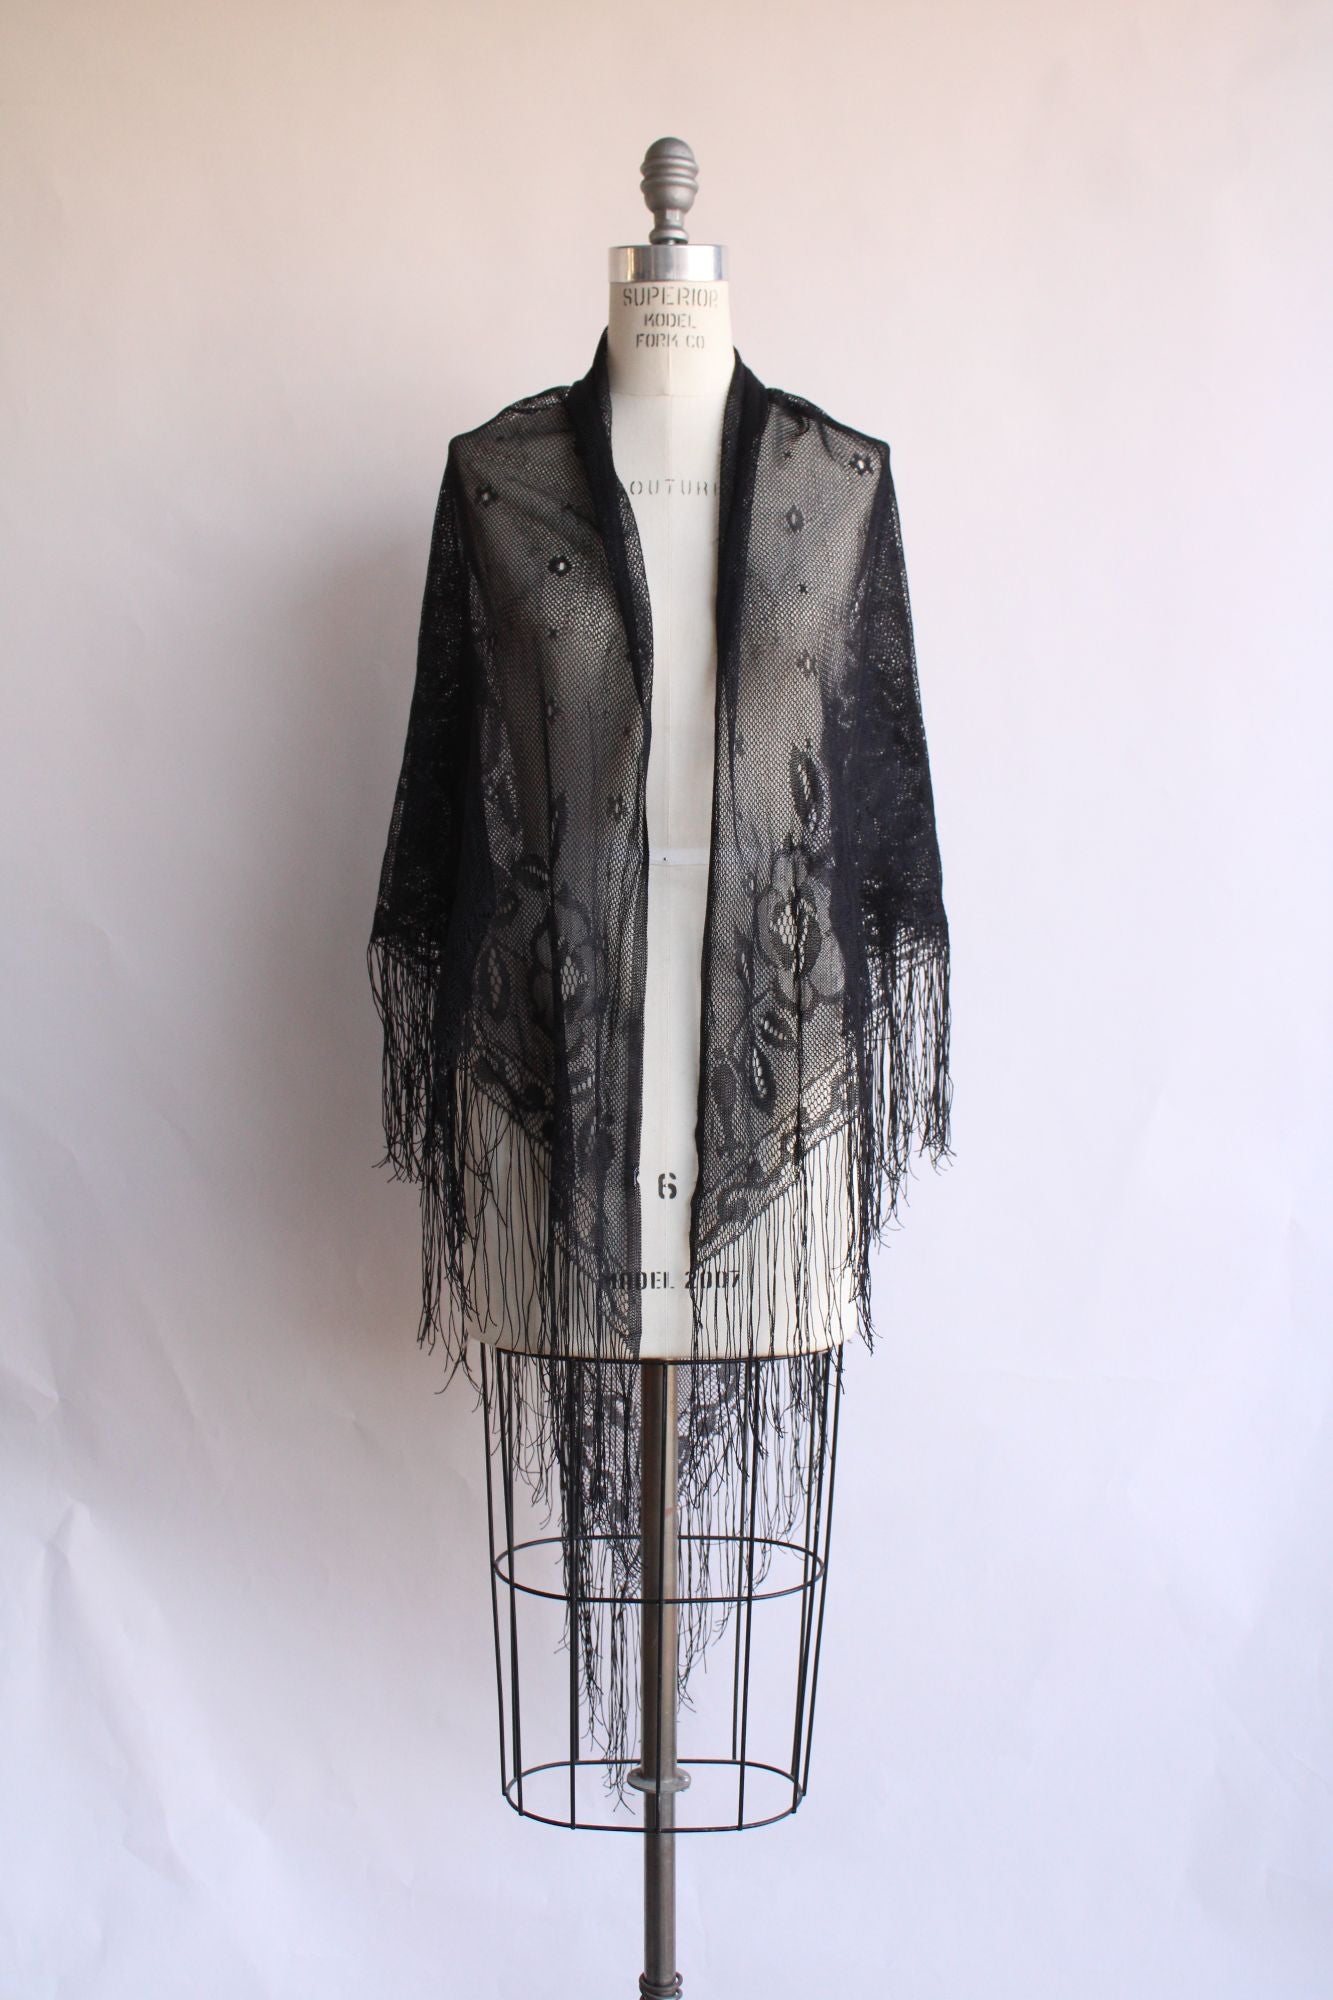 Womens Black Lace Shawl with Fringe, Triangle Wrap, Witchy Goth Style